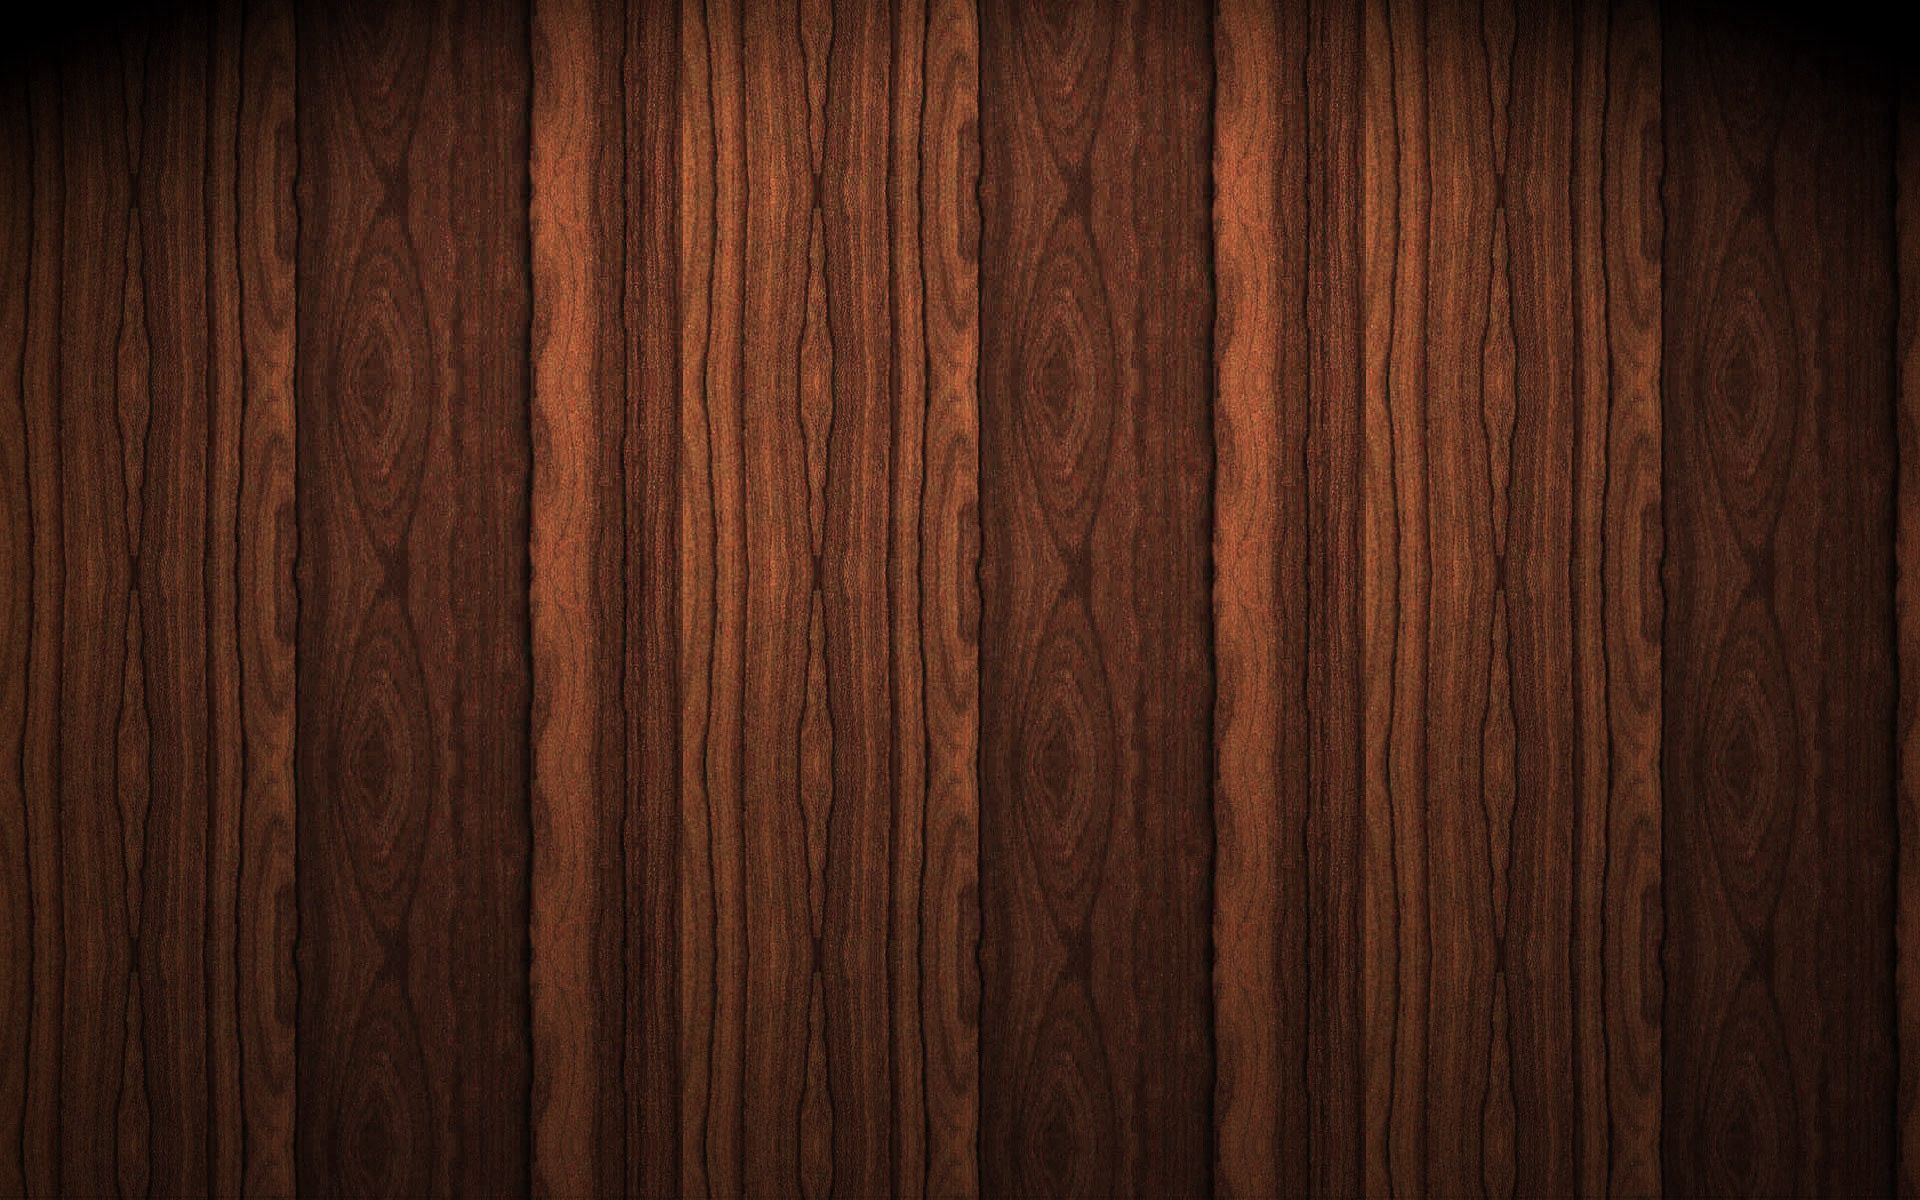 wooden, board, light, wood, texture, textures, surface, light coloured, planks